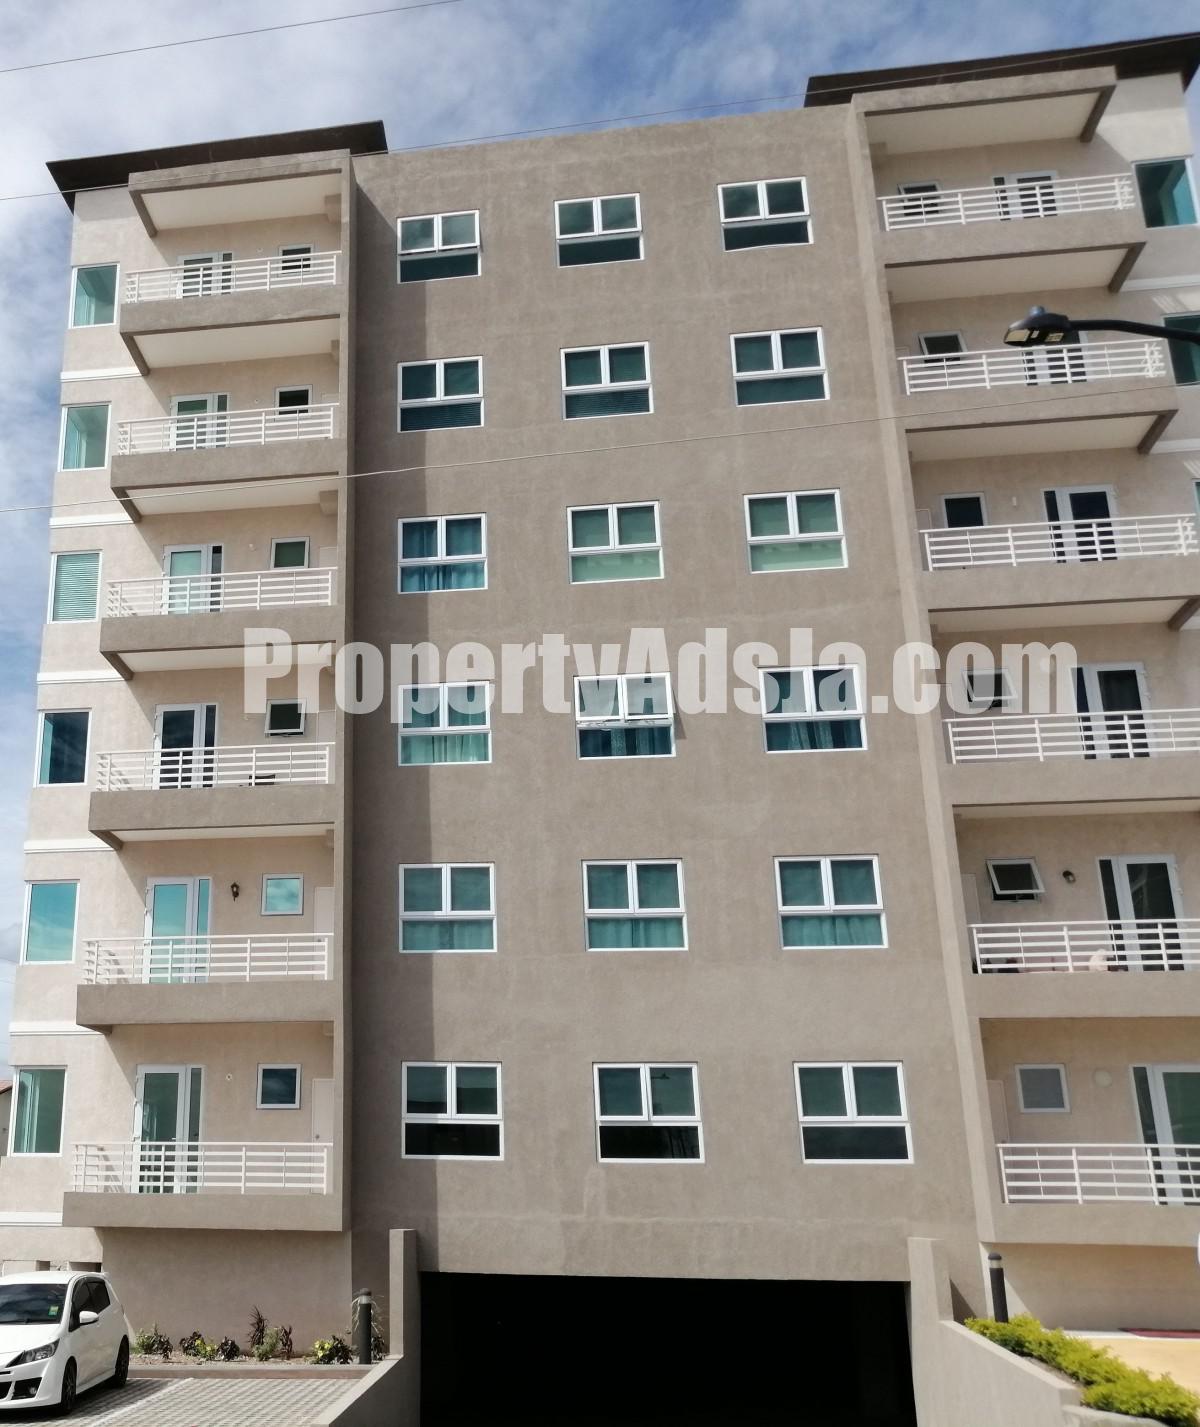 Apartment For Rent in The Lofts, Kingston / St. Andrew Jamaica ...